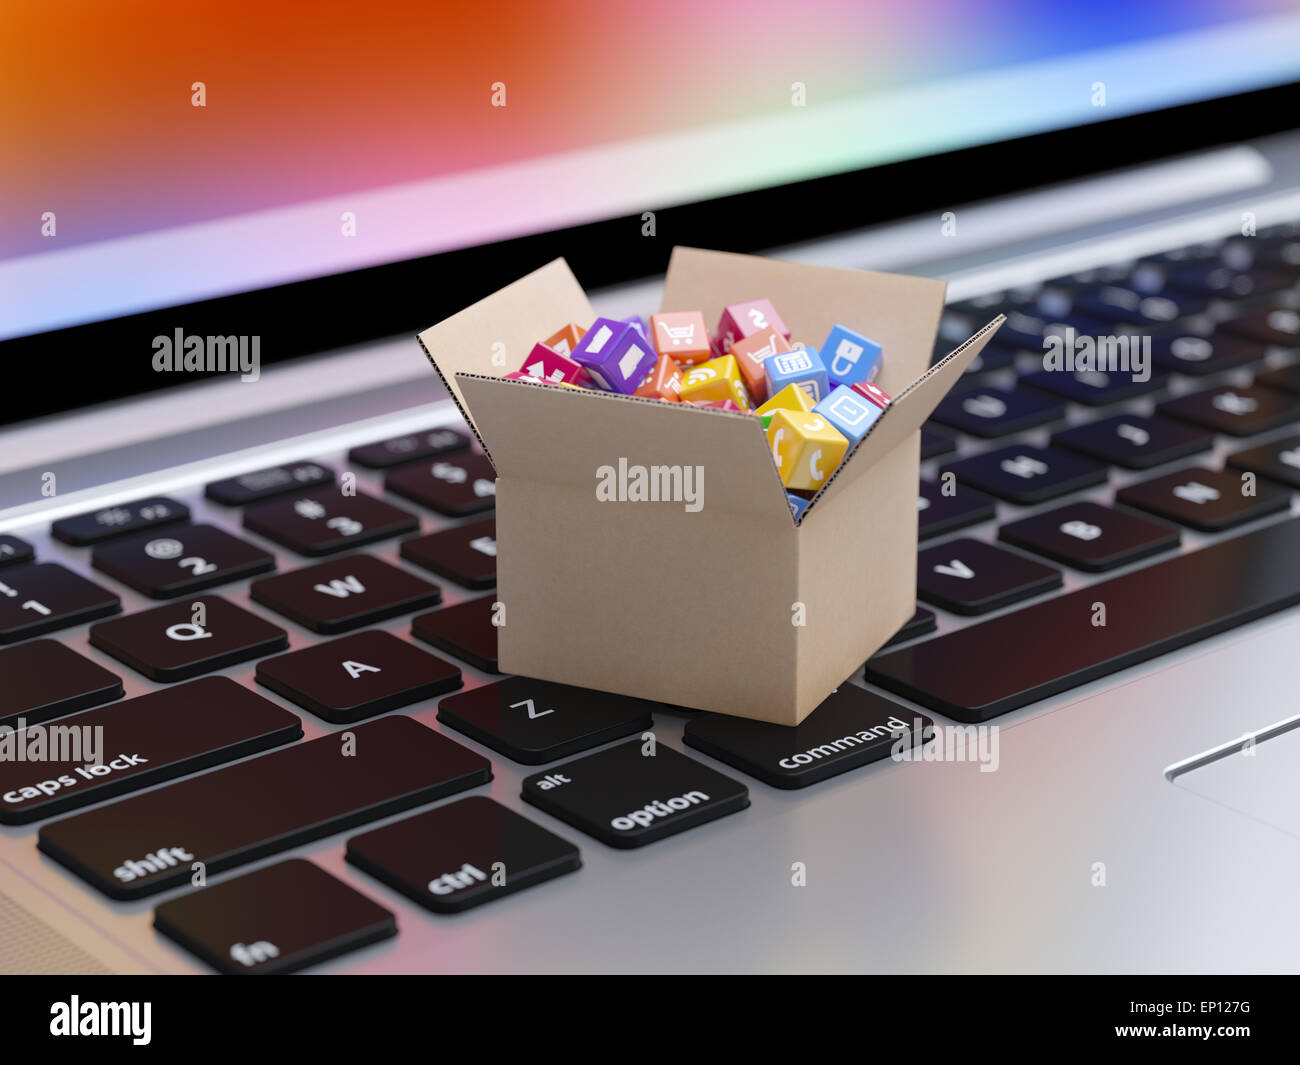 App icons and buttons for smartphone and tablet computer in cardboard box on the laptop keyboard. Mobile applications software a Stock Photo